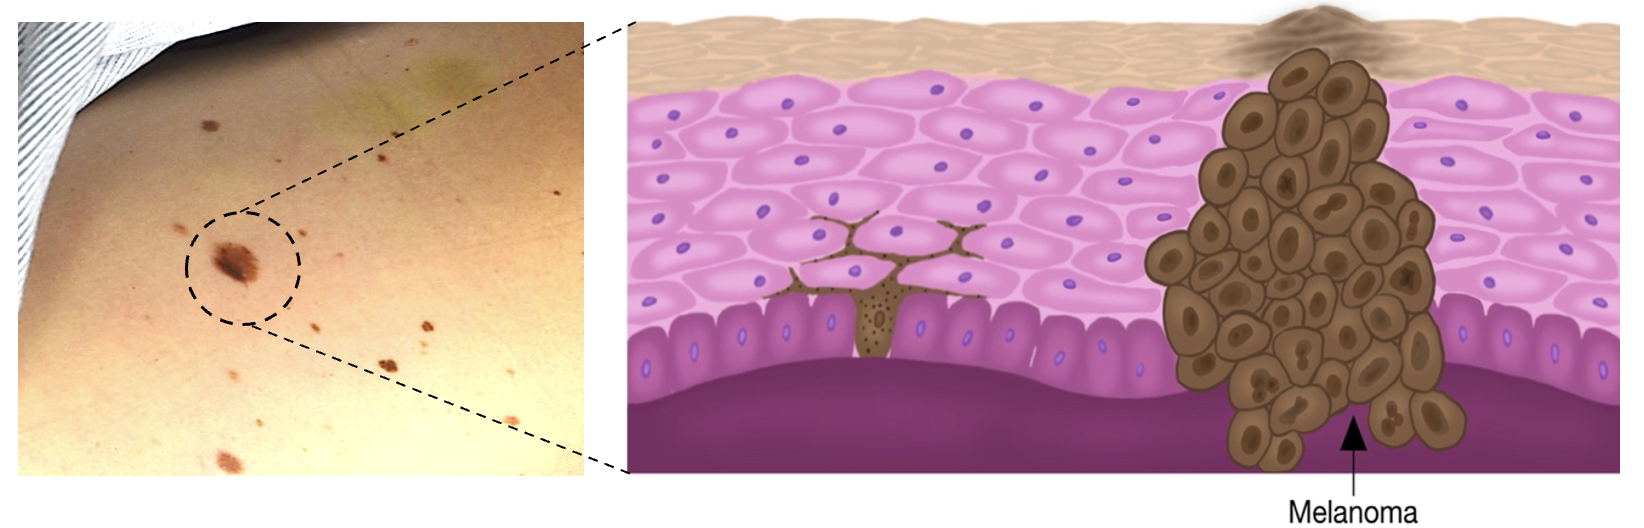 What melanoma could look like and the cells